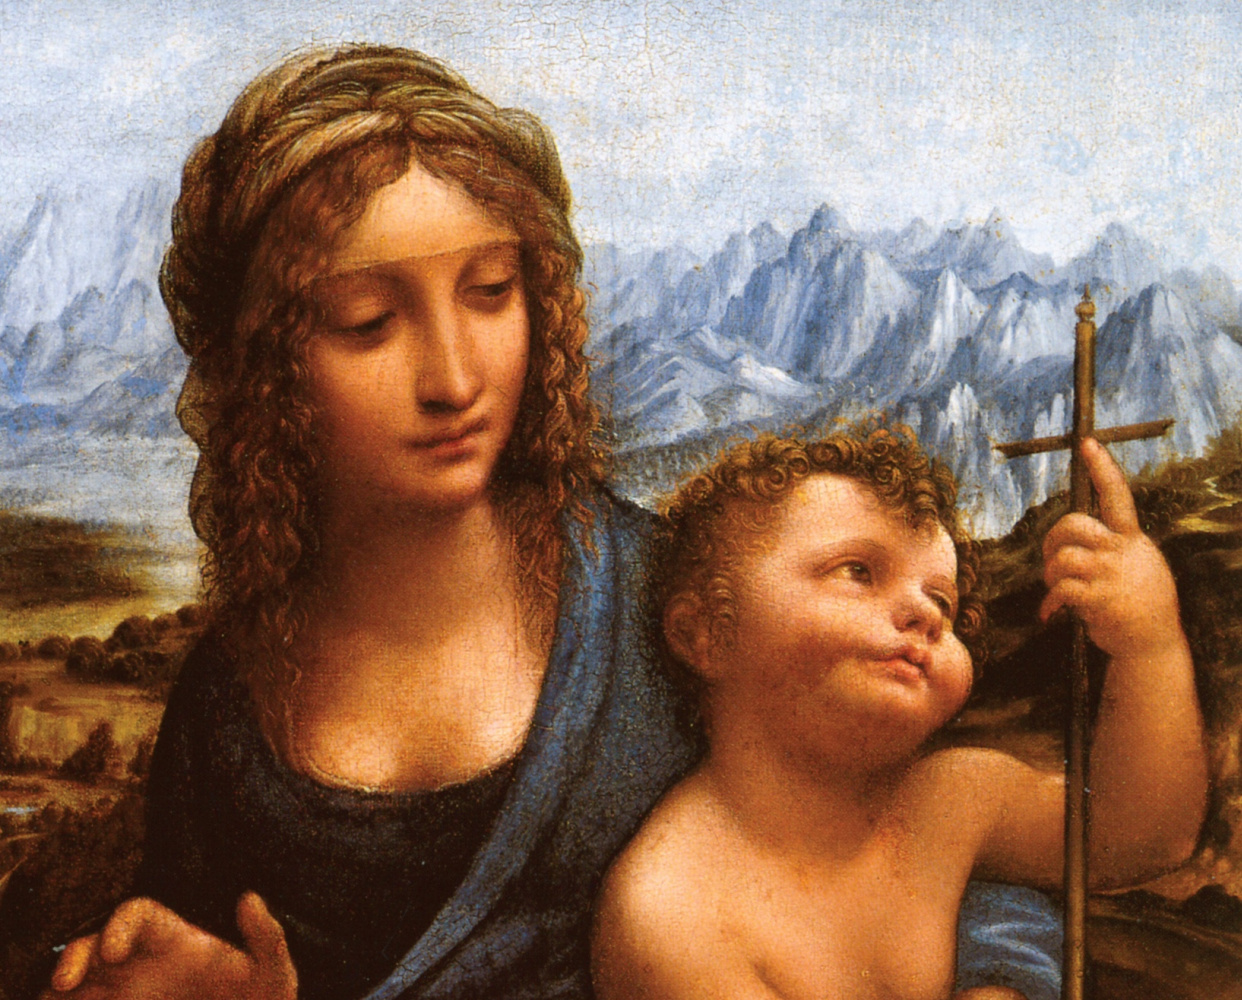 Tax archives unveiled the mystery of Leonardo da Vinci’s mother